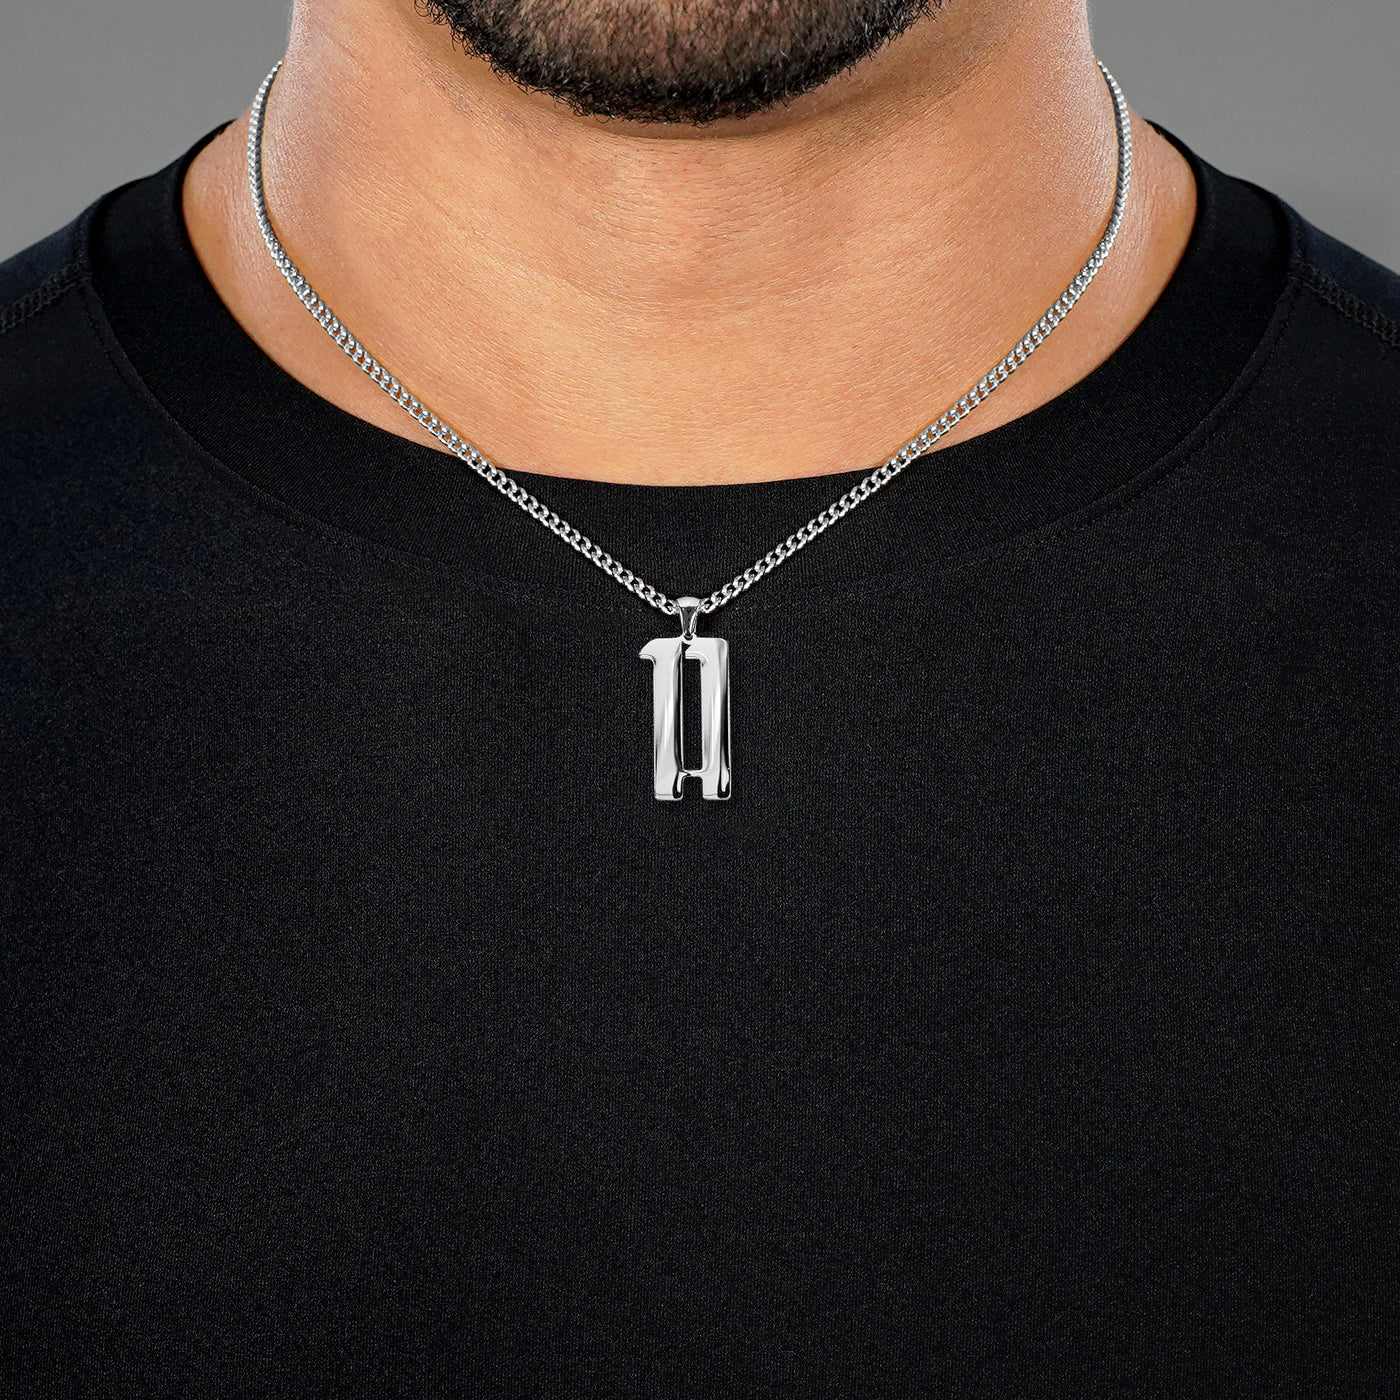 11 Number Pendant with Chain Necklace - Stainless Steel